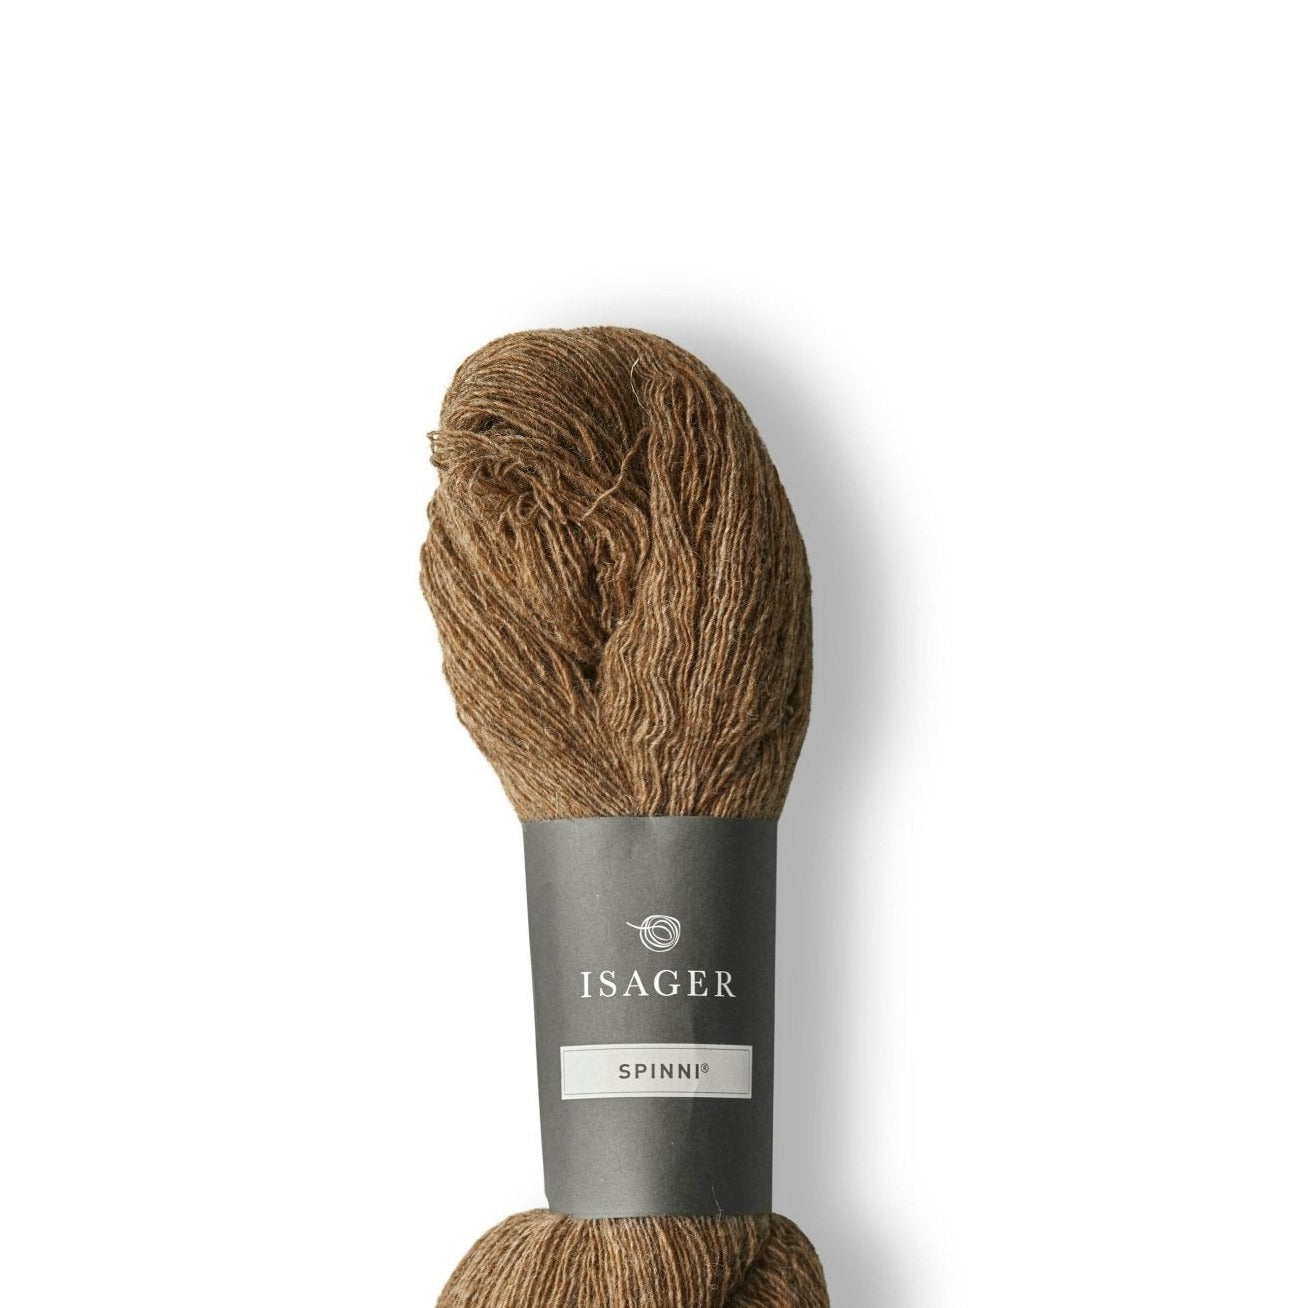 Isager Spinni - 8s - 2 Ply - Isager - The Little Yarn Store